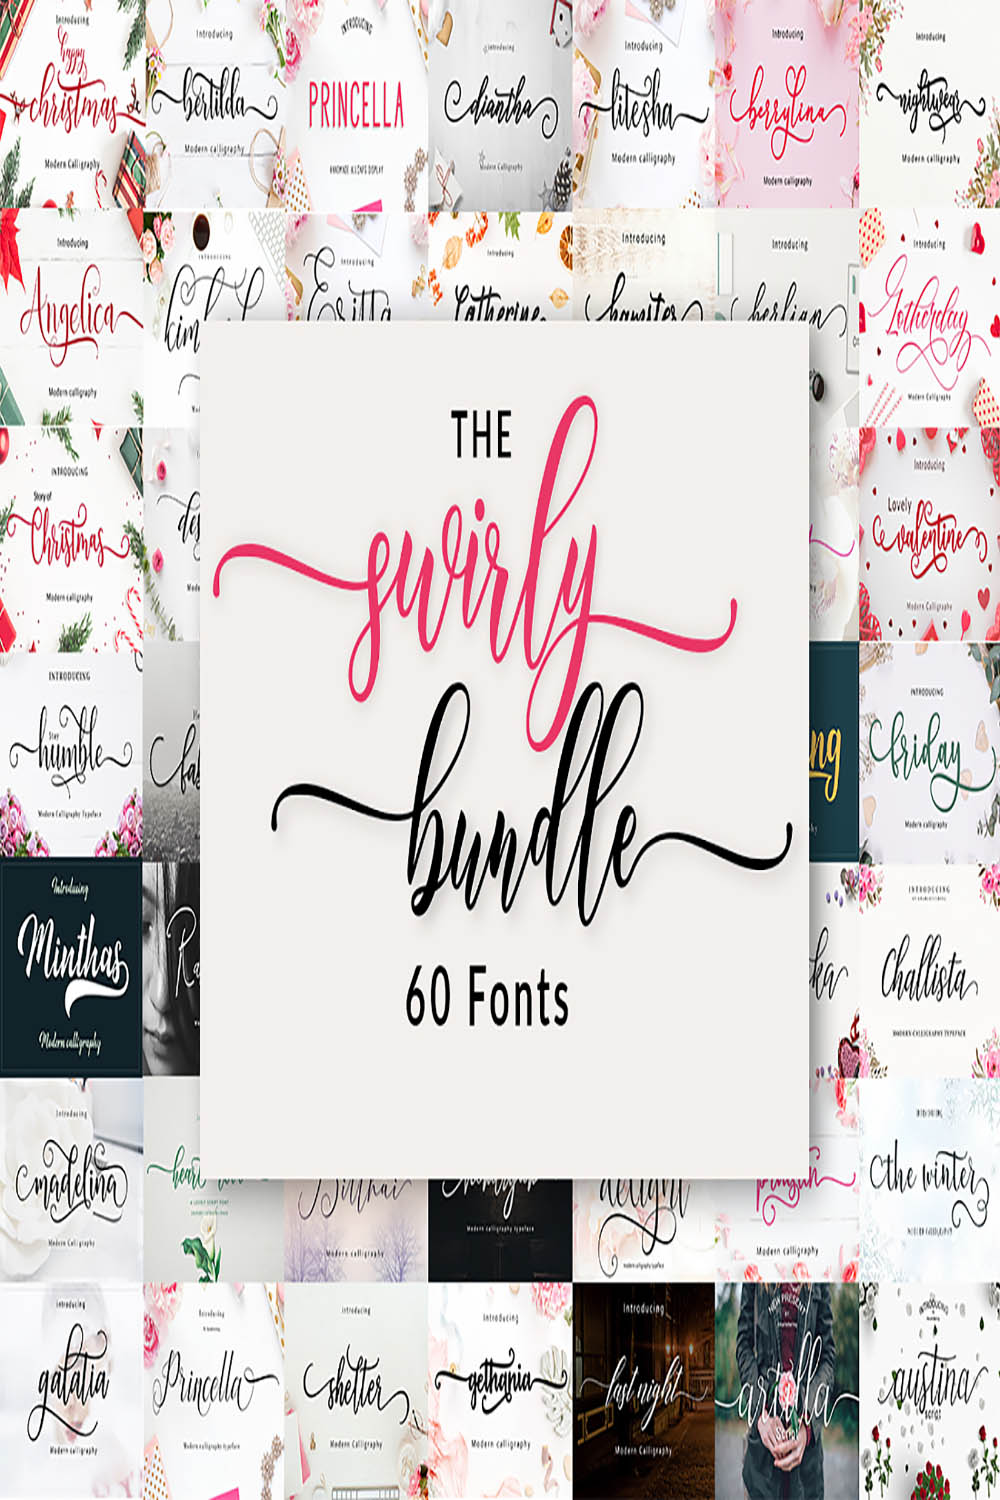 The Swirly Fonts Bundle pinterest preview image.